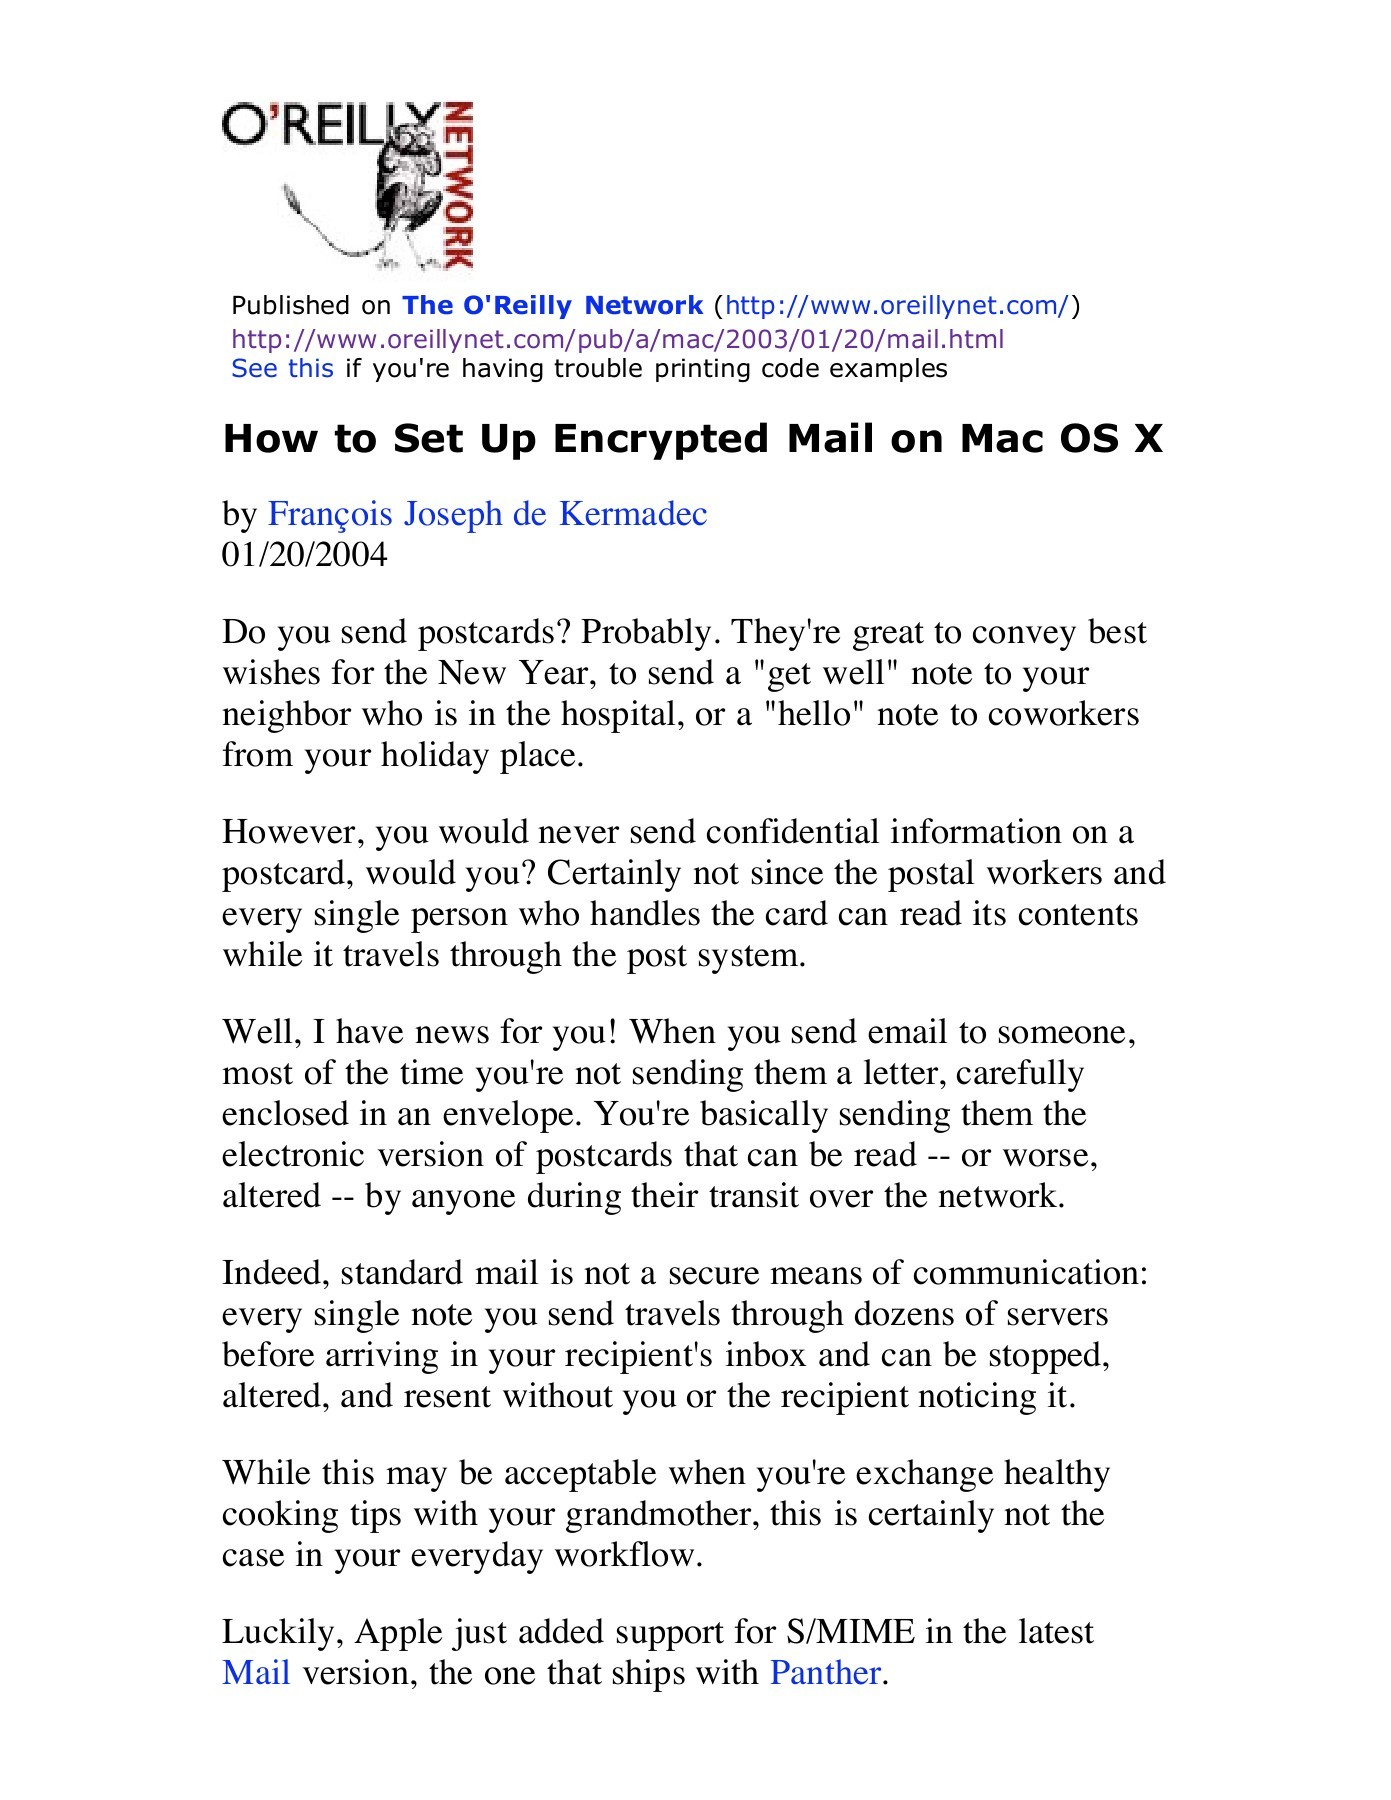 encryption email for mac mail